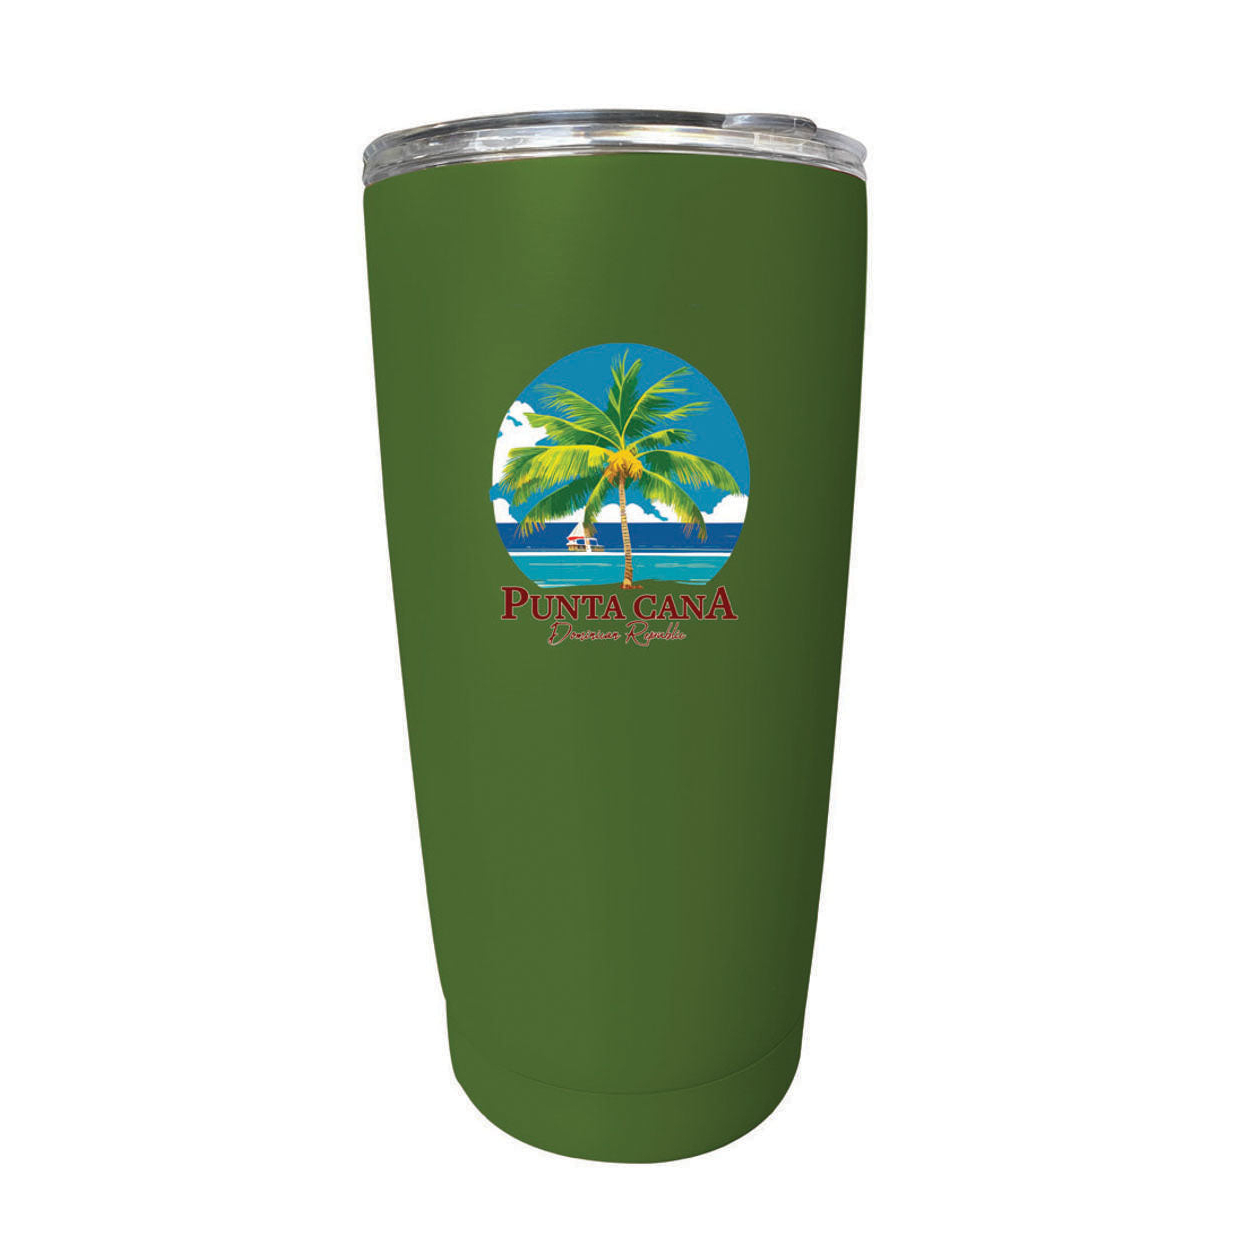 Punta Cana Dominican Republic Souvenir 16 Oz Stainless Steel Insulated Tumbler - Gray, PALM